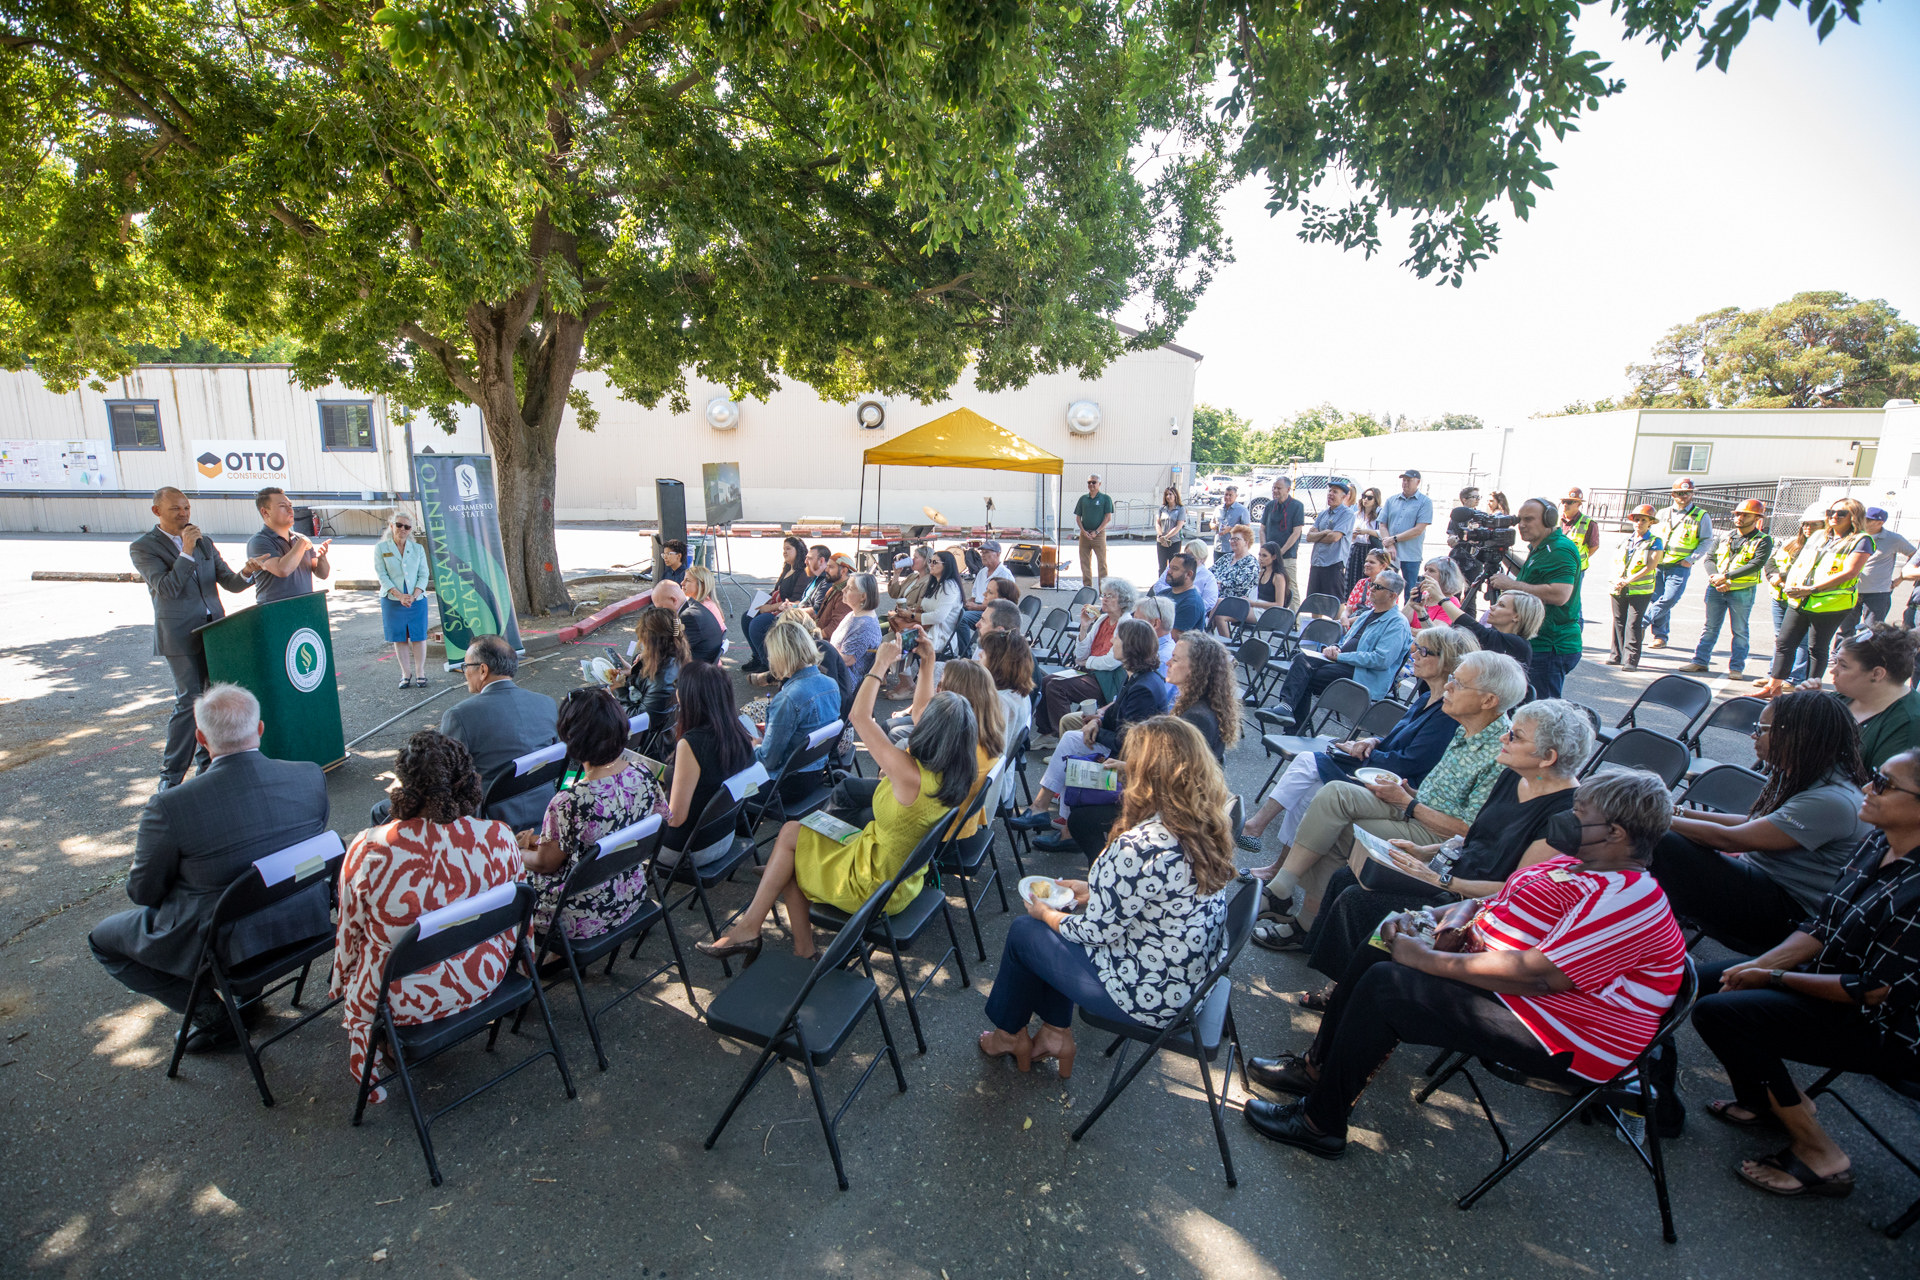 Attendees sit in share under a shade tree while a speaker talks at a groundbreaking event.